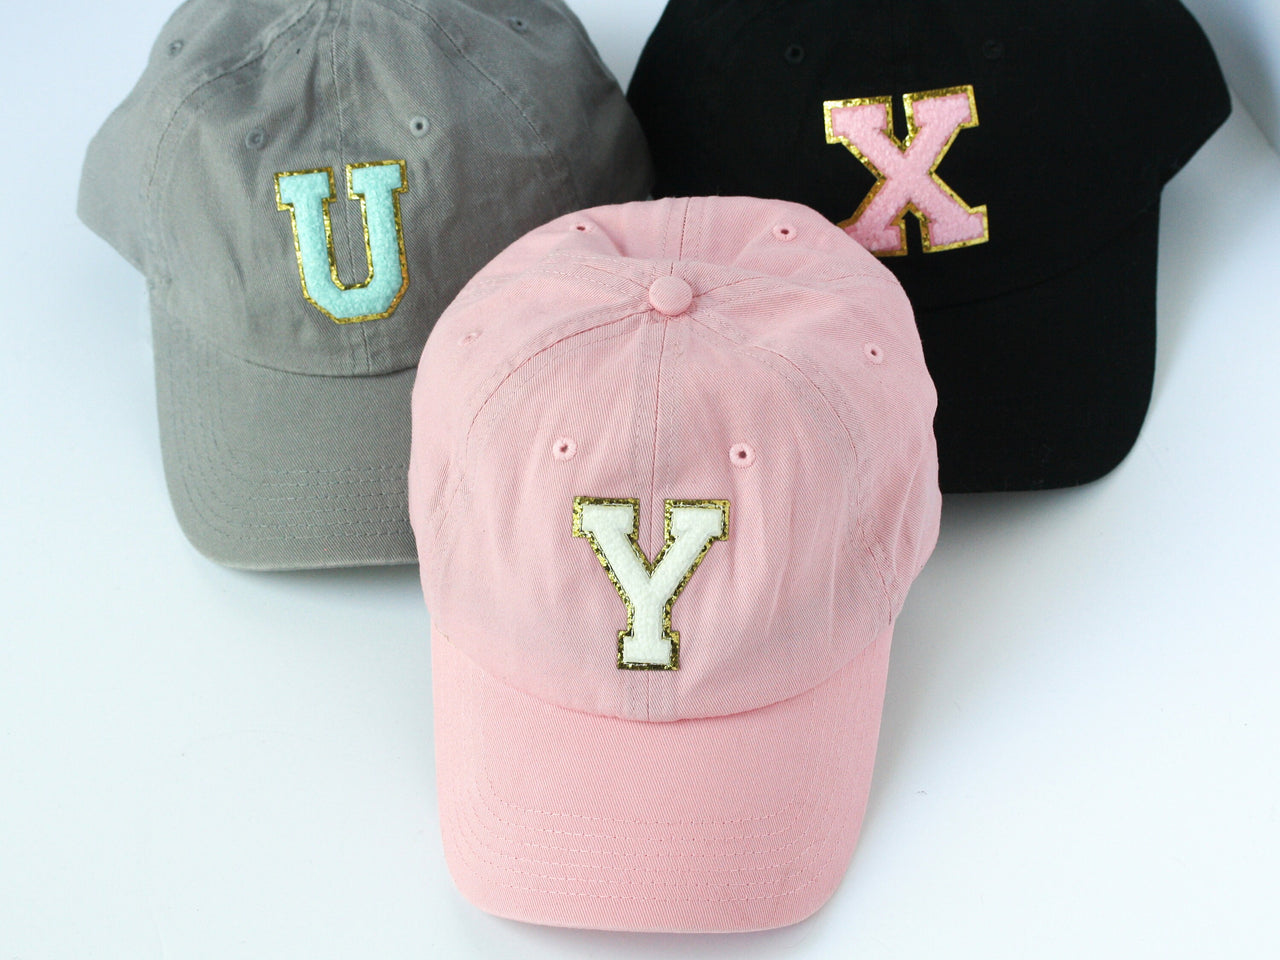 Varsity Letter Patch Hat, Preppy Ball Cap, Personalized soft top baseball hat for bride and bridesmaids, bachelorette party hats, Beach pool